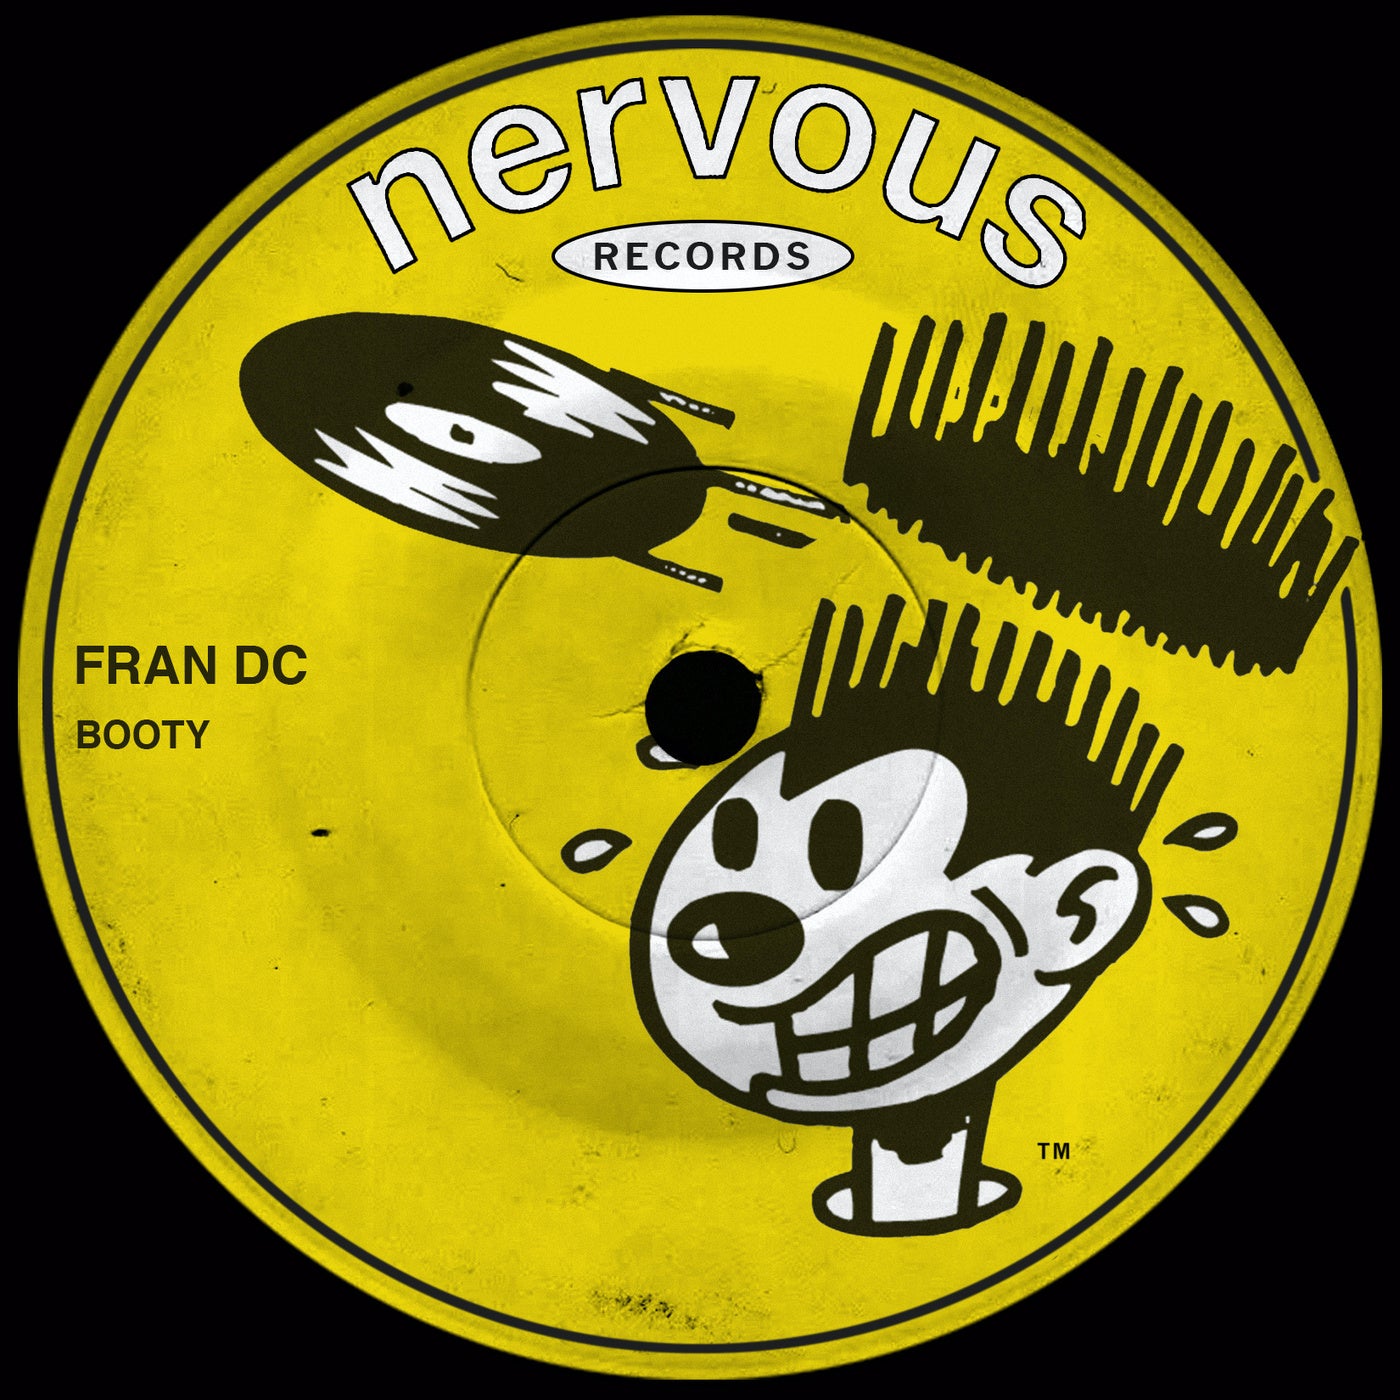 Download Fran Dc - Booty on Electrobuzz